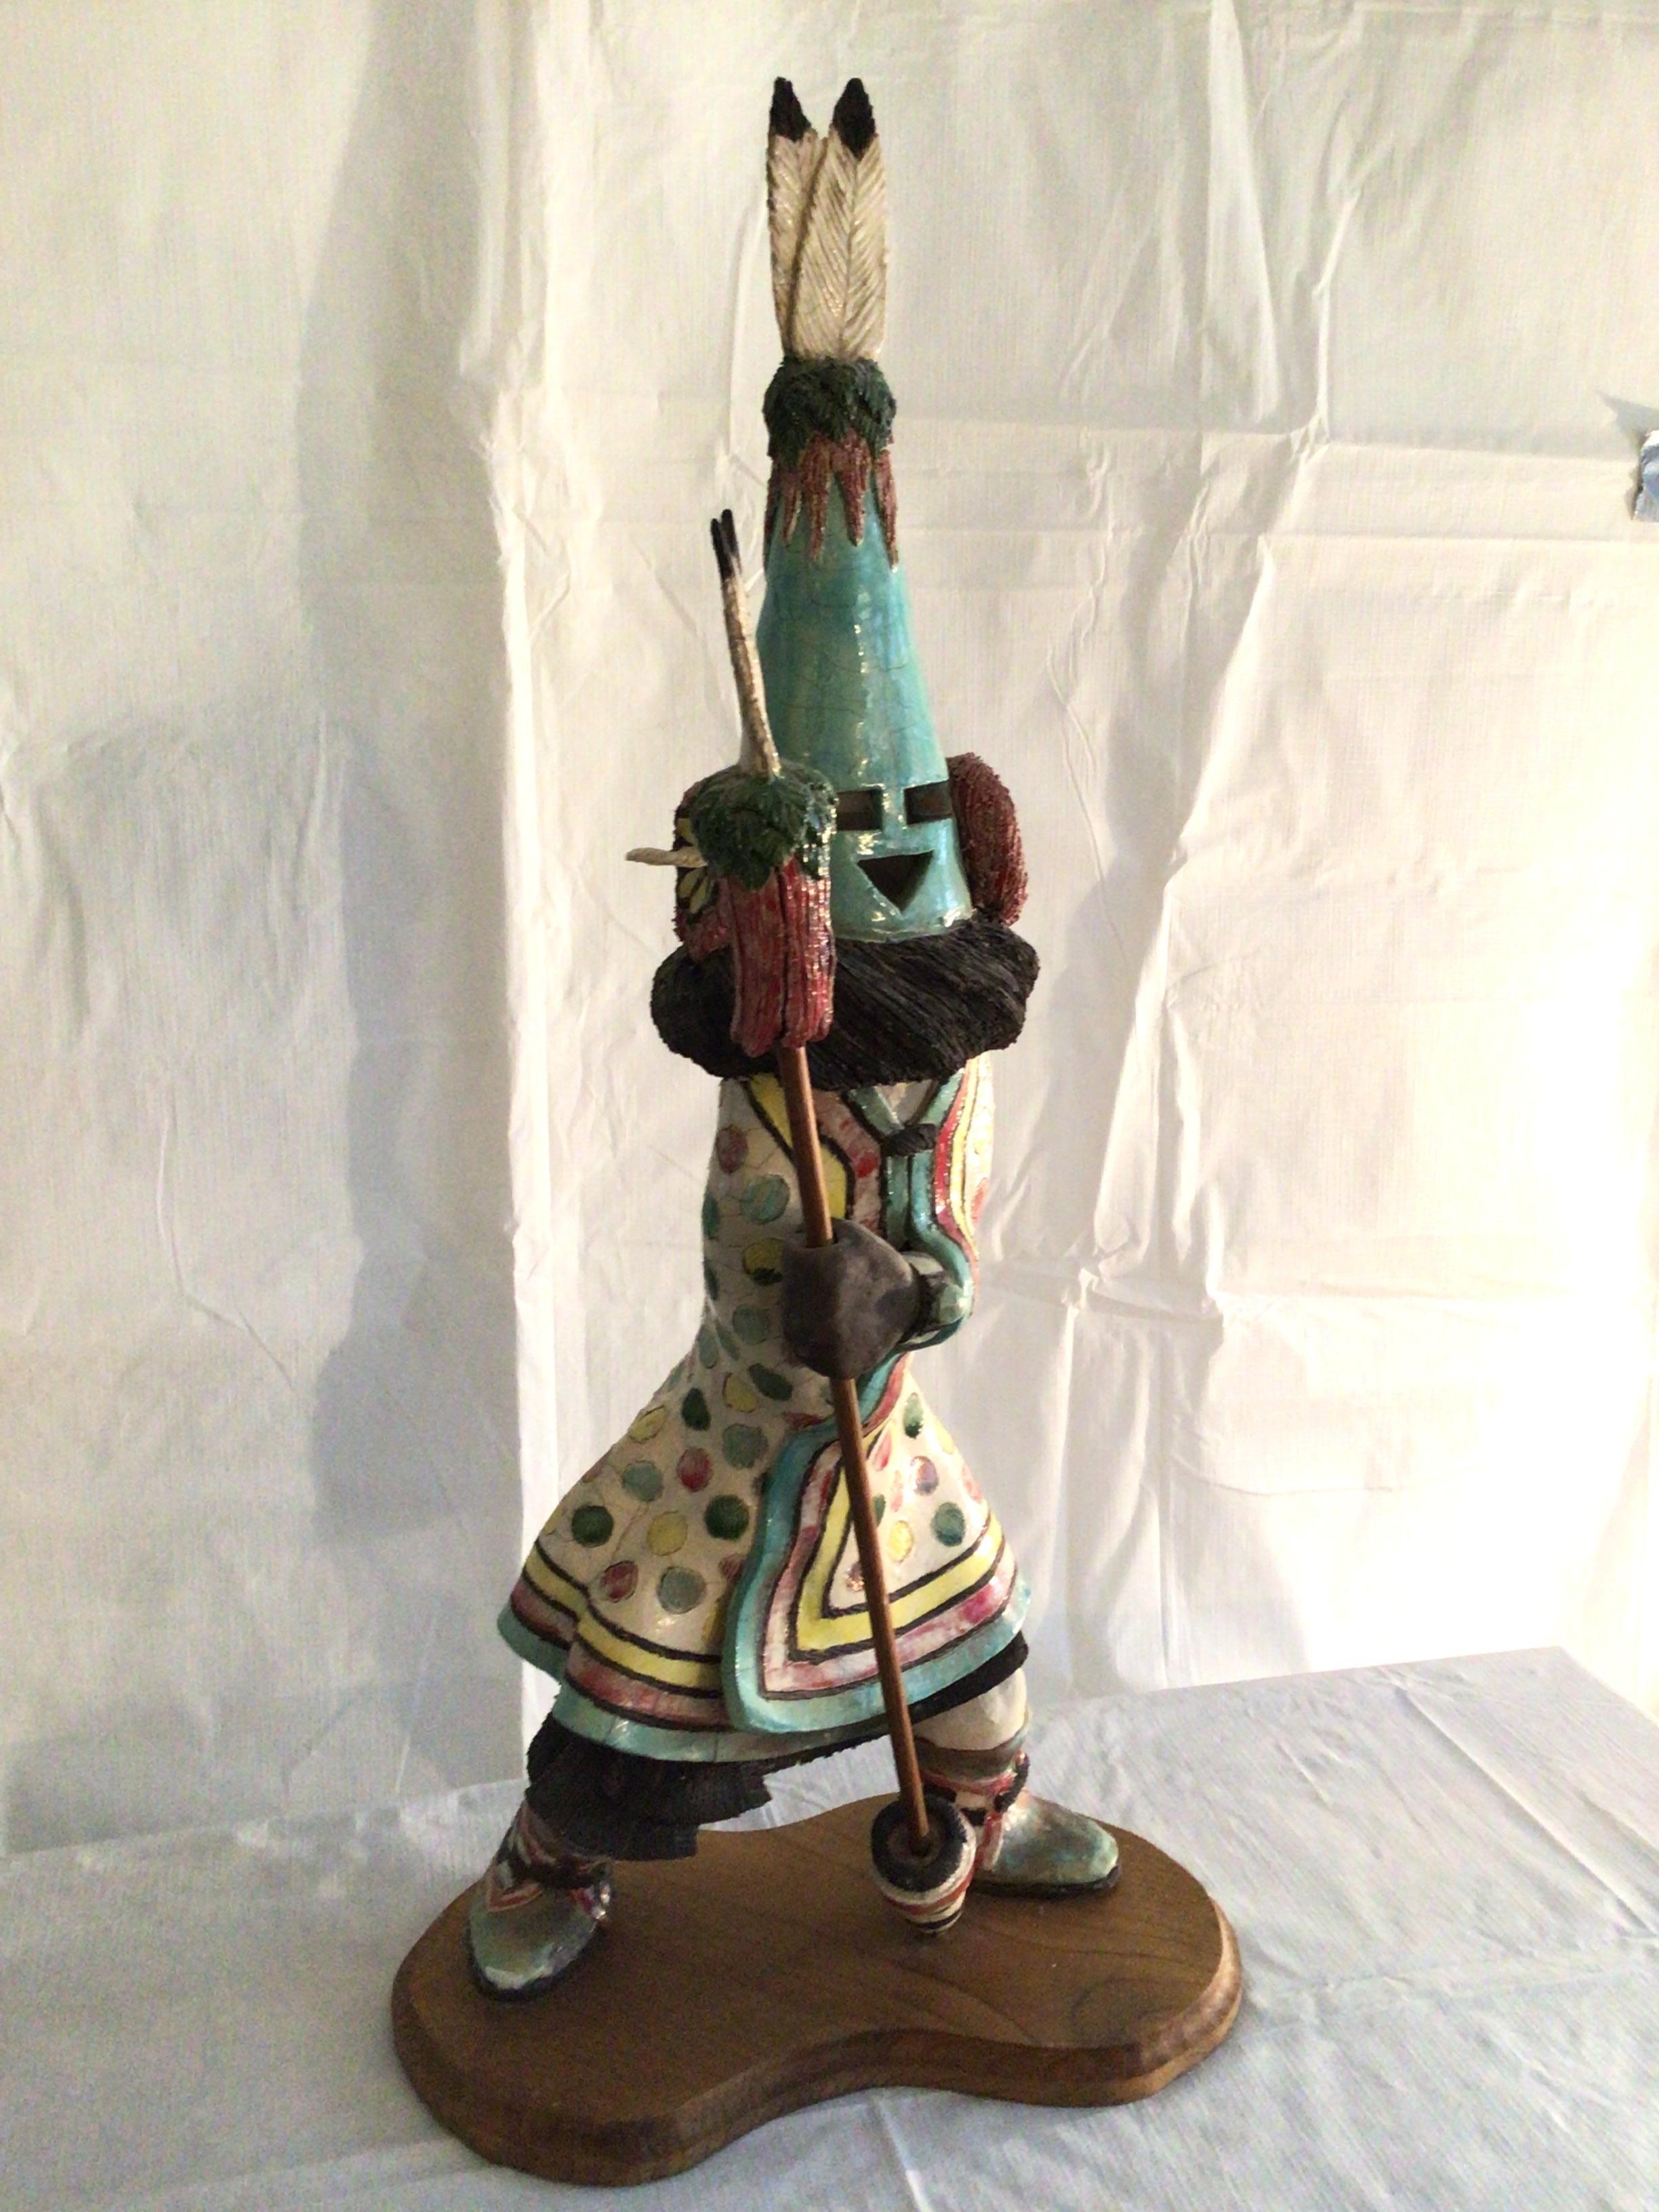 1995 Hopi Kachina Doll - Aholi on wood base
Matte and Glazed in ceramic (heavy)
Feather missing on one ear muff 
The perfect addition to any Kachina Doll collection.